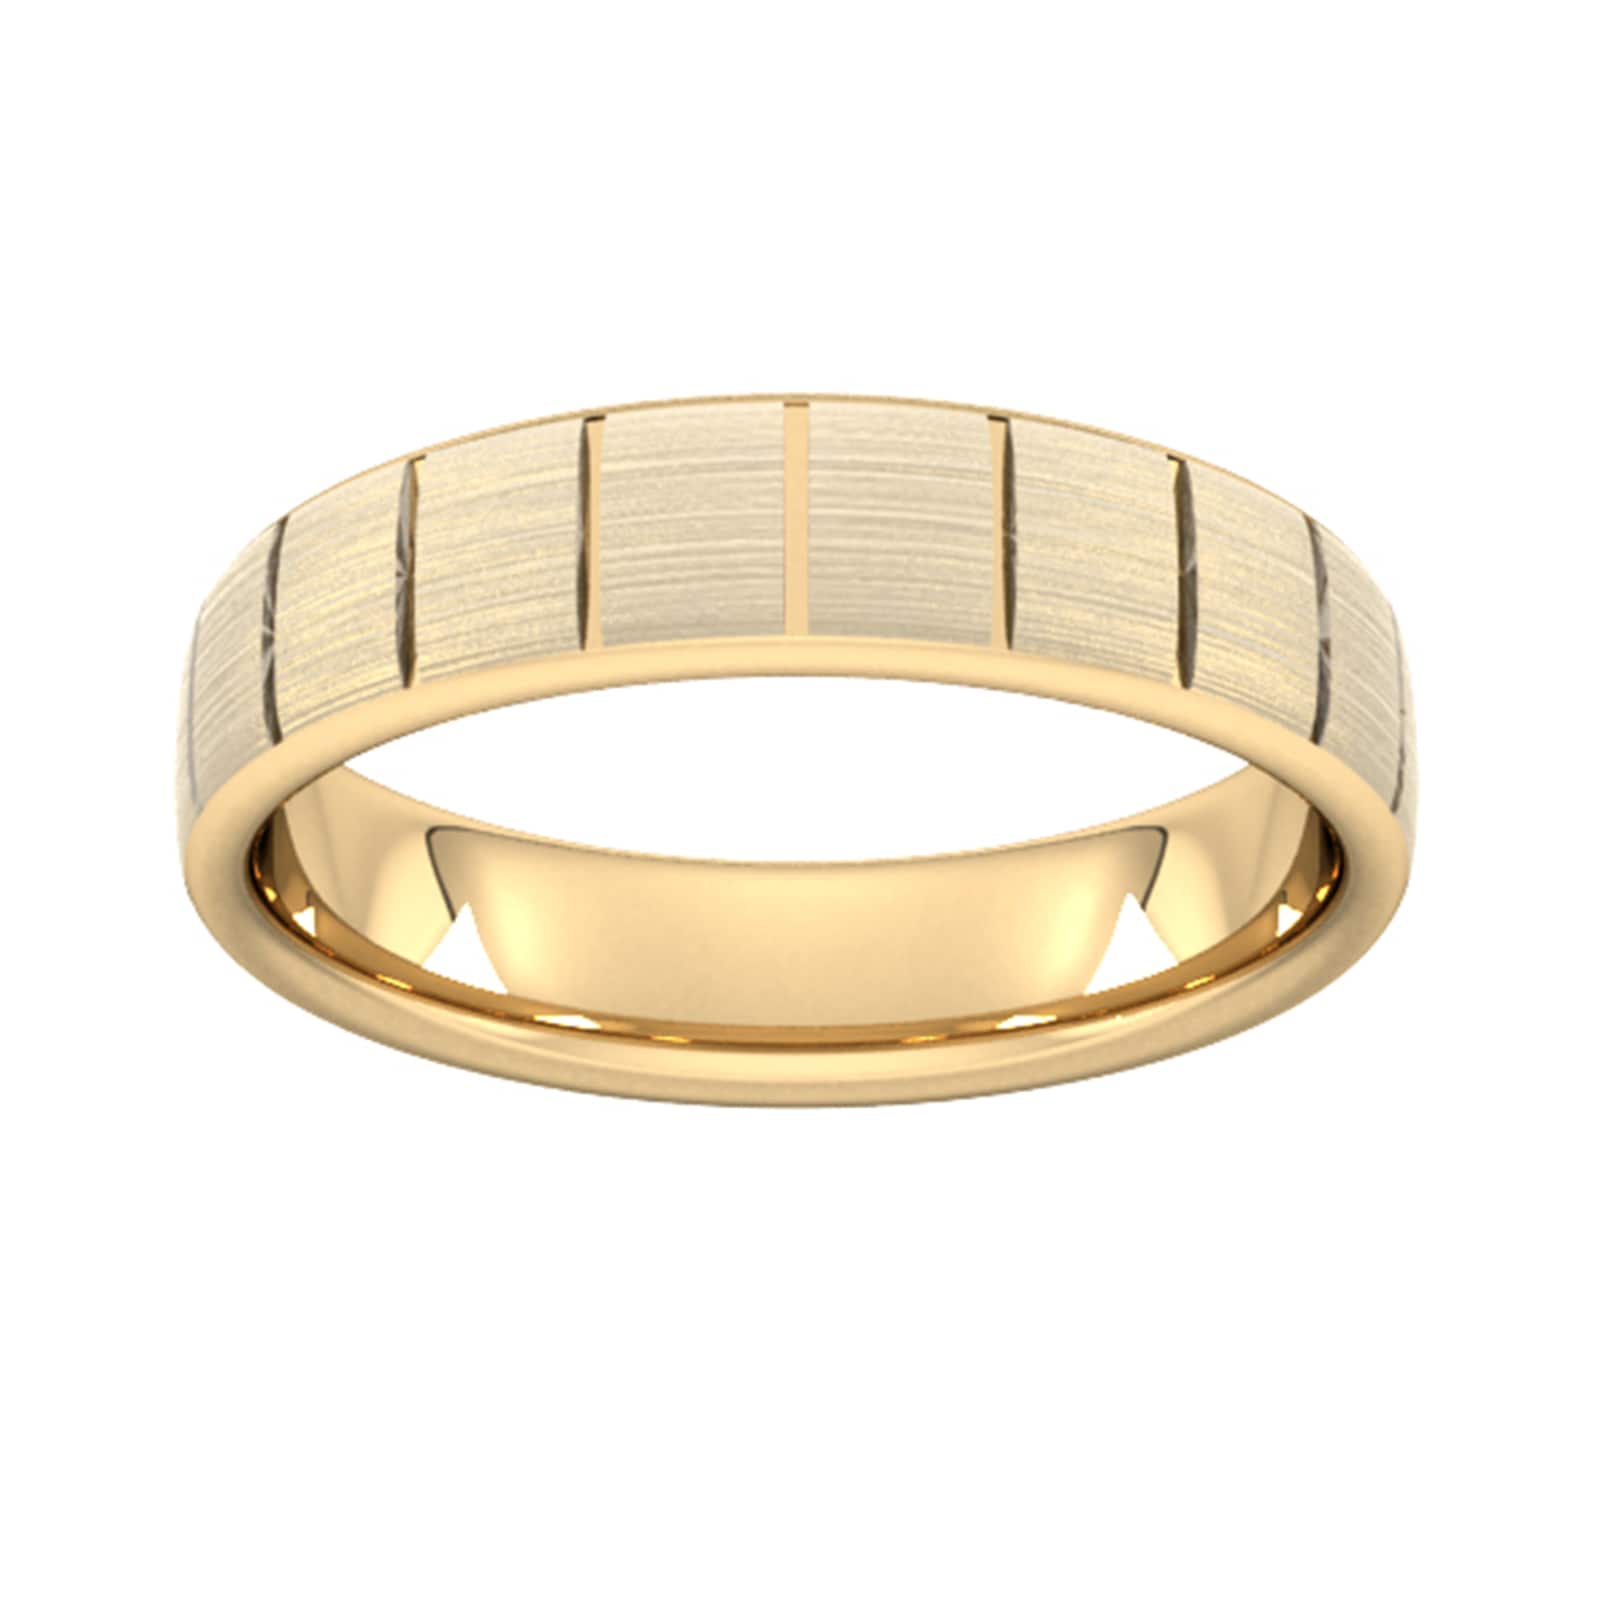 5mm Slight Court Extra Heavy Vertical Lines Wedding Ring In 18 Carat Yellow Gold - Ring Size J